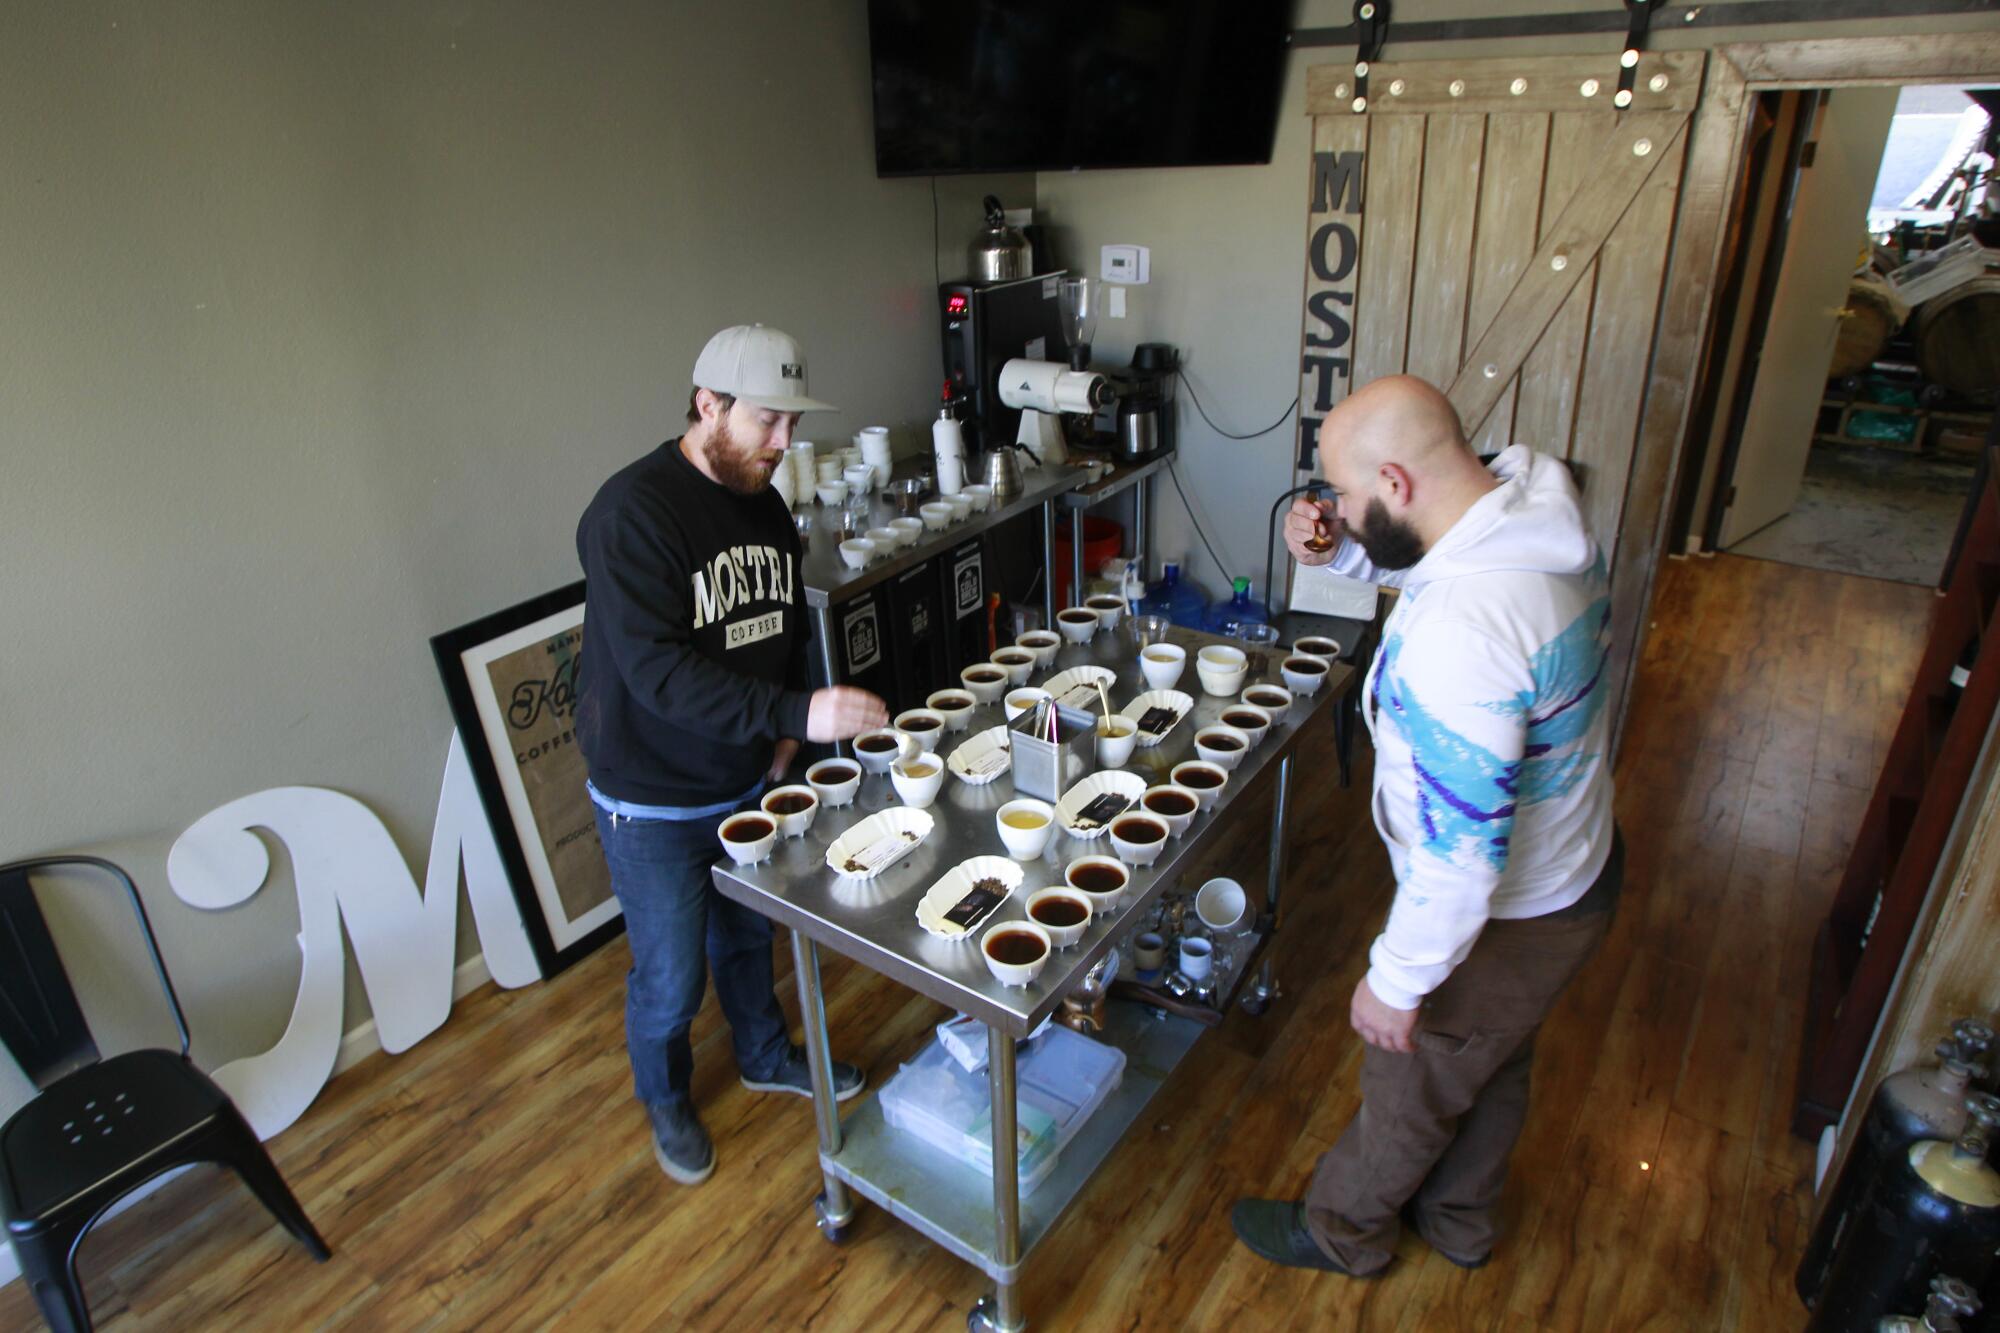 Head roaster Nick Berardi (right) and director of coffee Ryan Sullivan taste test different coffees at the Mostra roasting facility.